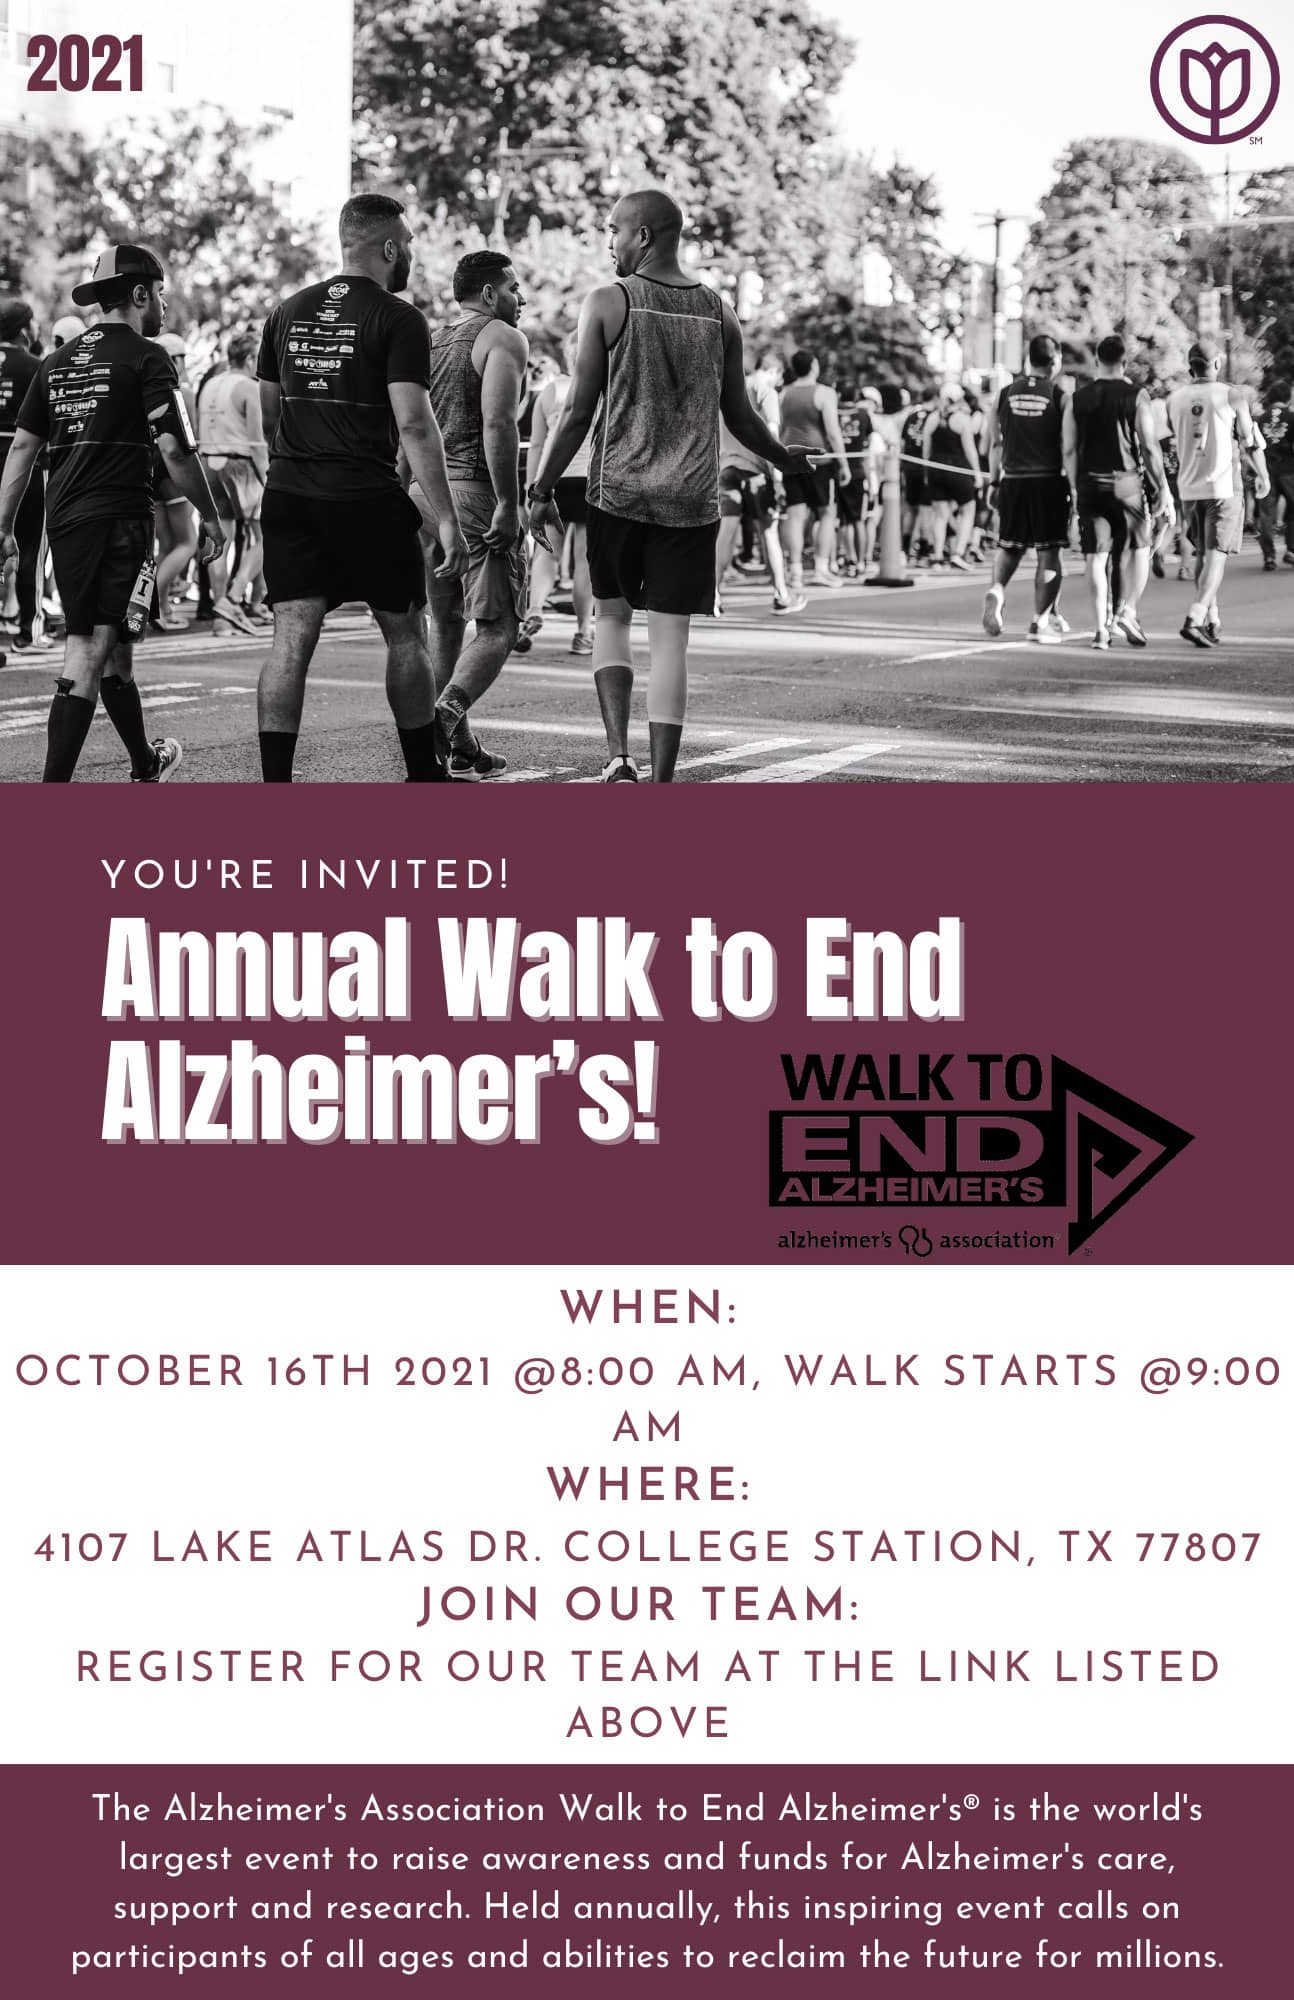 Walk to End Alzheimer's Advertisement with people walking to help raise money for Alzheimer's Research on October 16, 2021 at 8:00 am at 4107 Lake Atlas Dr. College Station, TX 77807